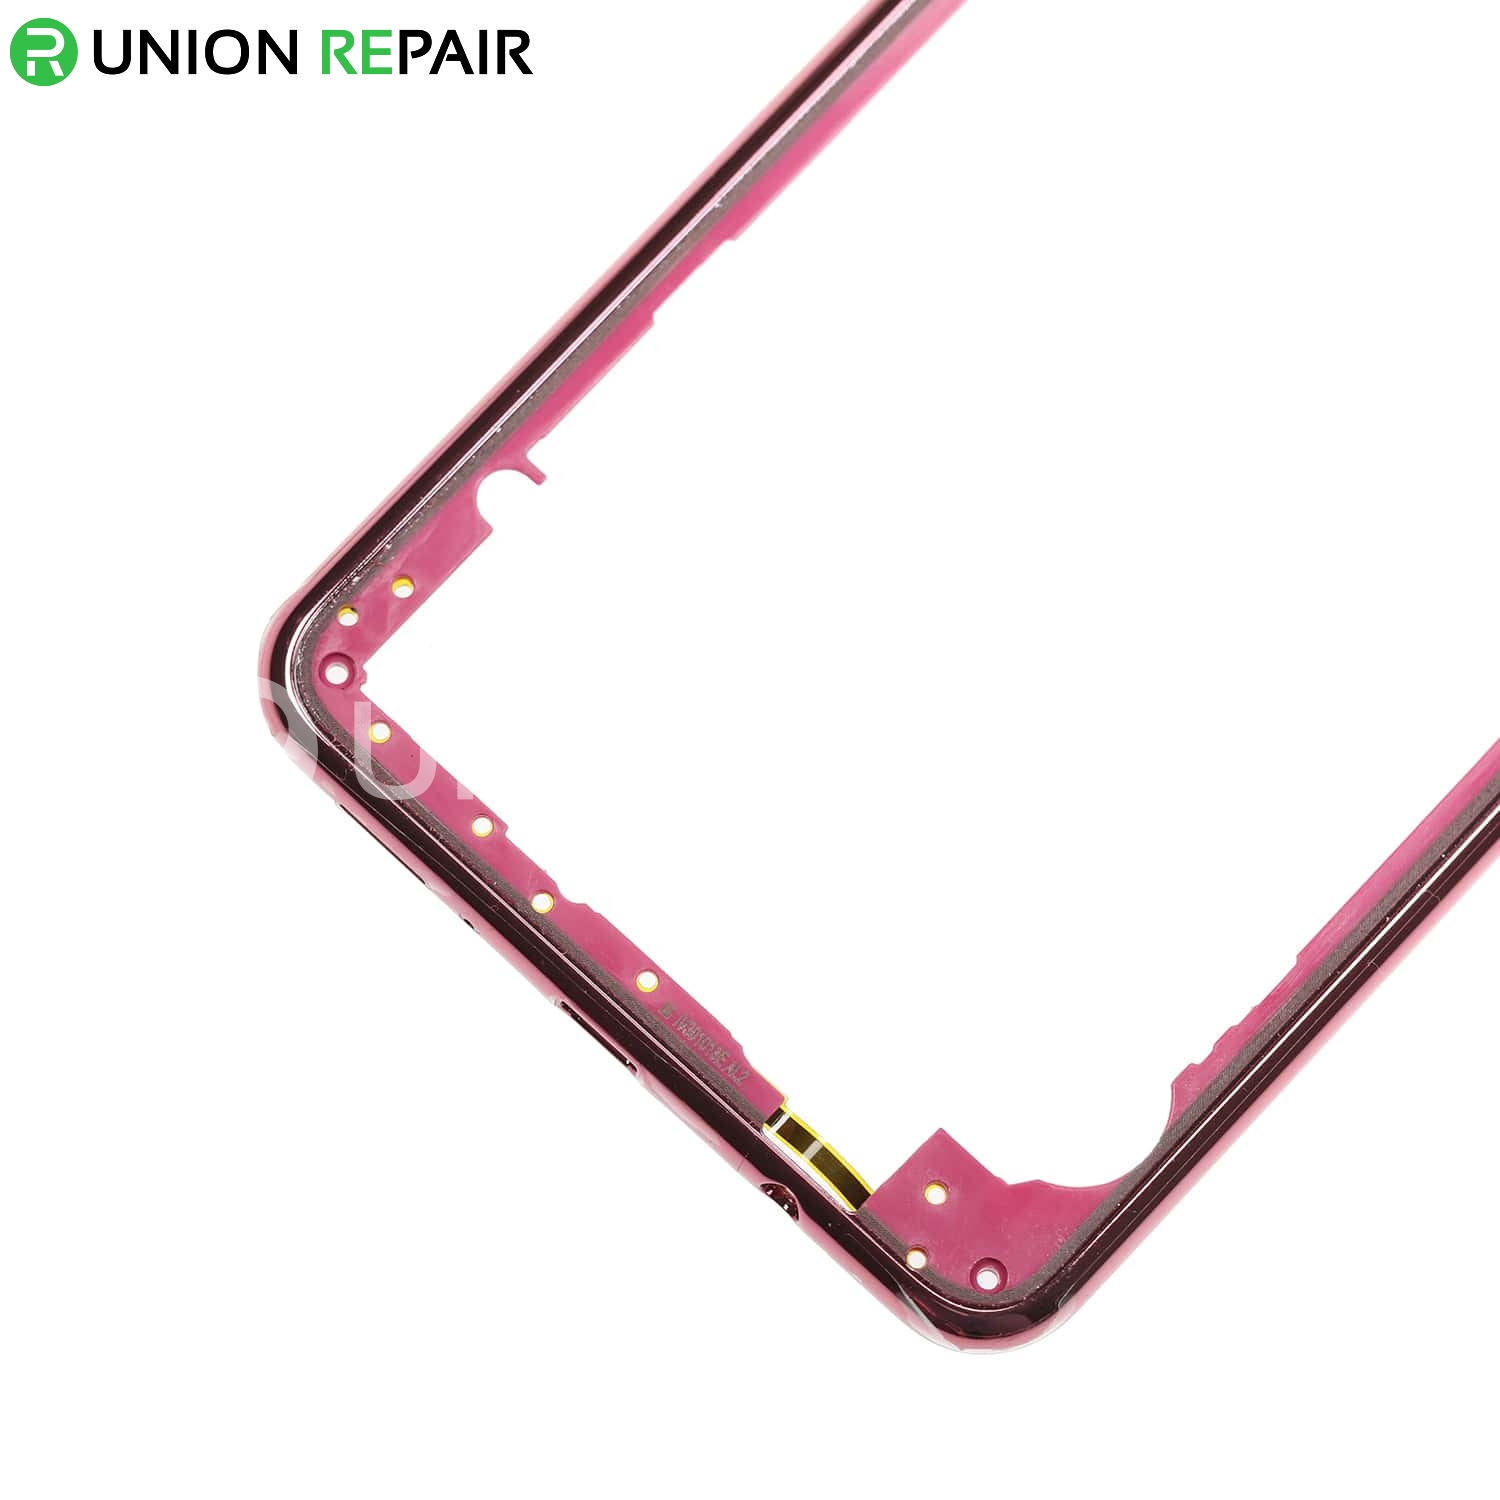 Replacement for Samsung Galaxy A7 (2018) SM-A750 Rear Housing - Pink